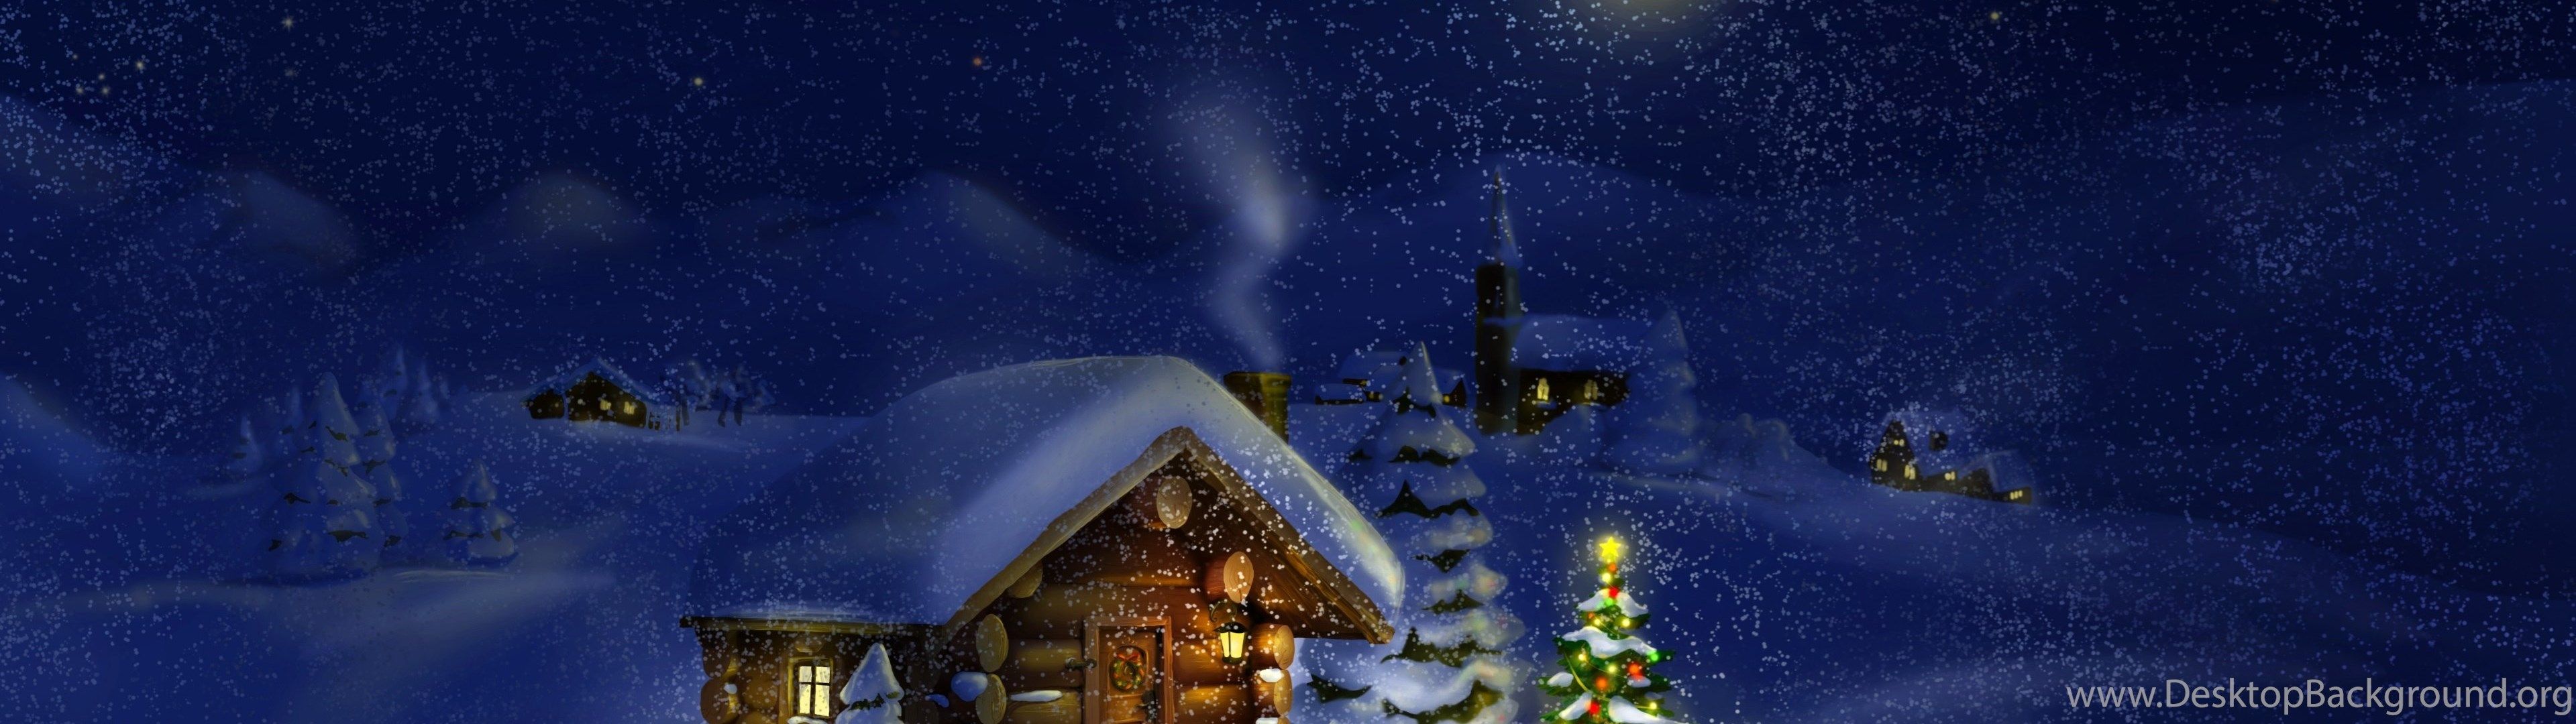 3840x1080 Christmas Wallpaper 79 images